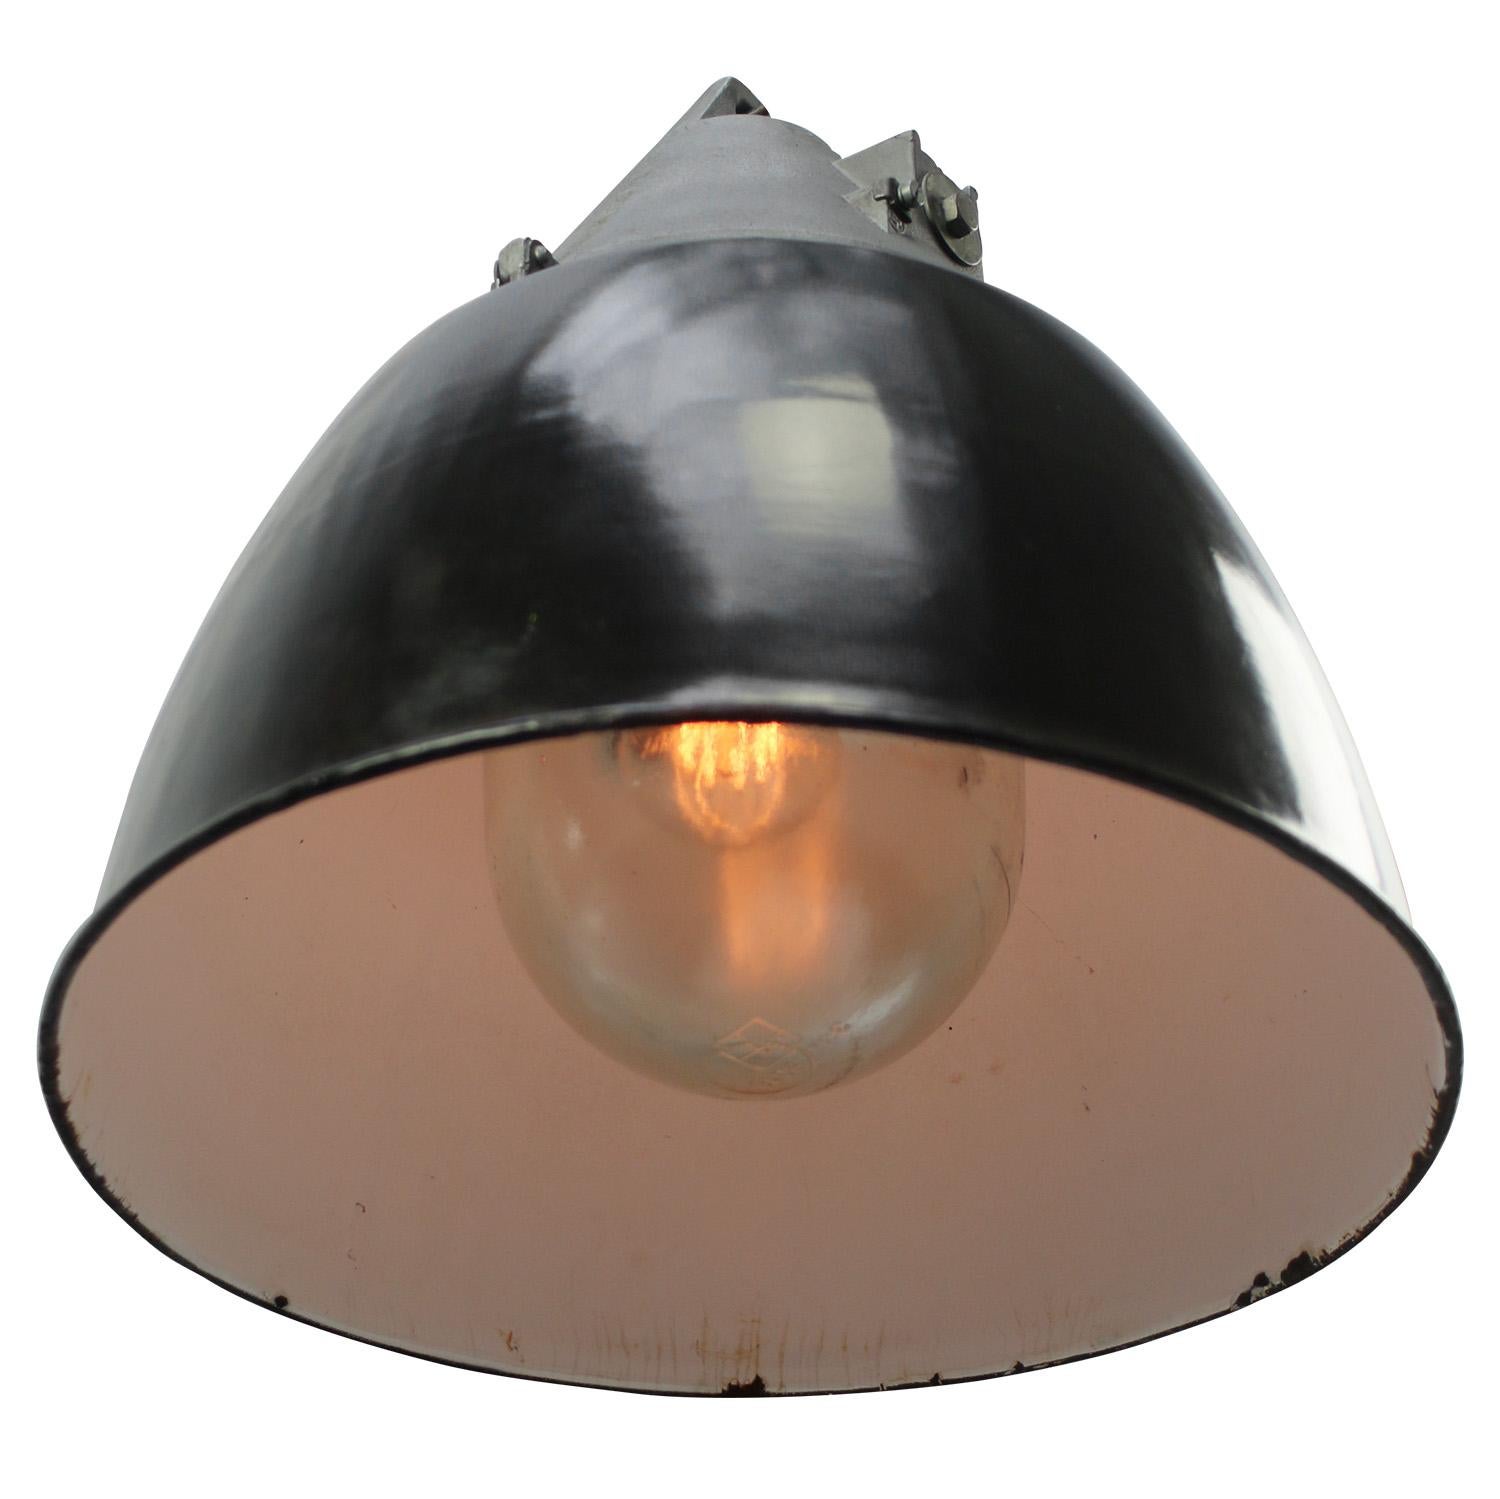 Black enamel vintage industrial pendant light
Cast aluminium top with clear glass

Weight: 7.00 kg / 15.4 lb

Priced per individual item. All lamps have been made suitable by international standards for incandescent light bulbs, energy-efficient and